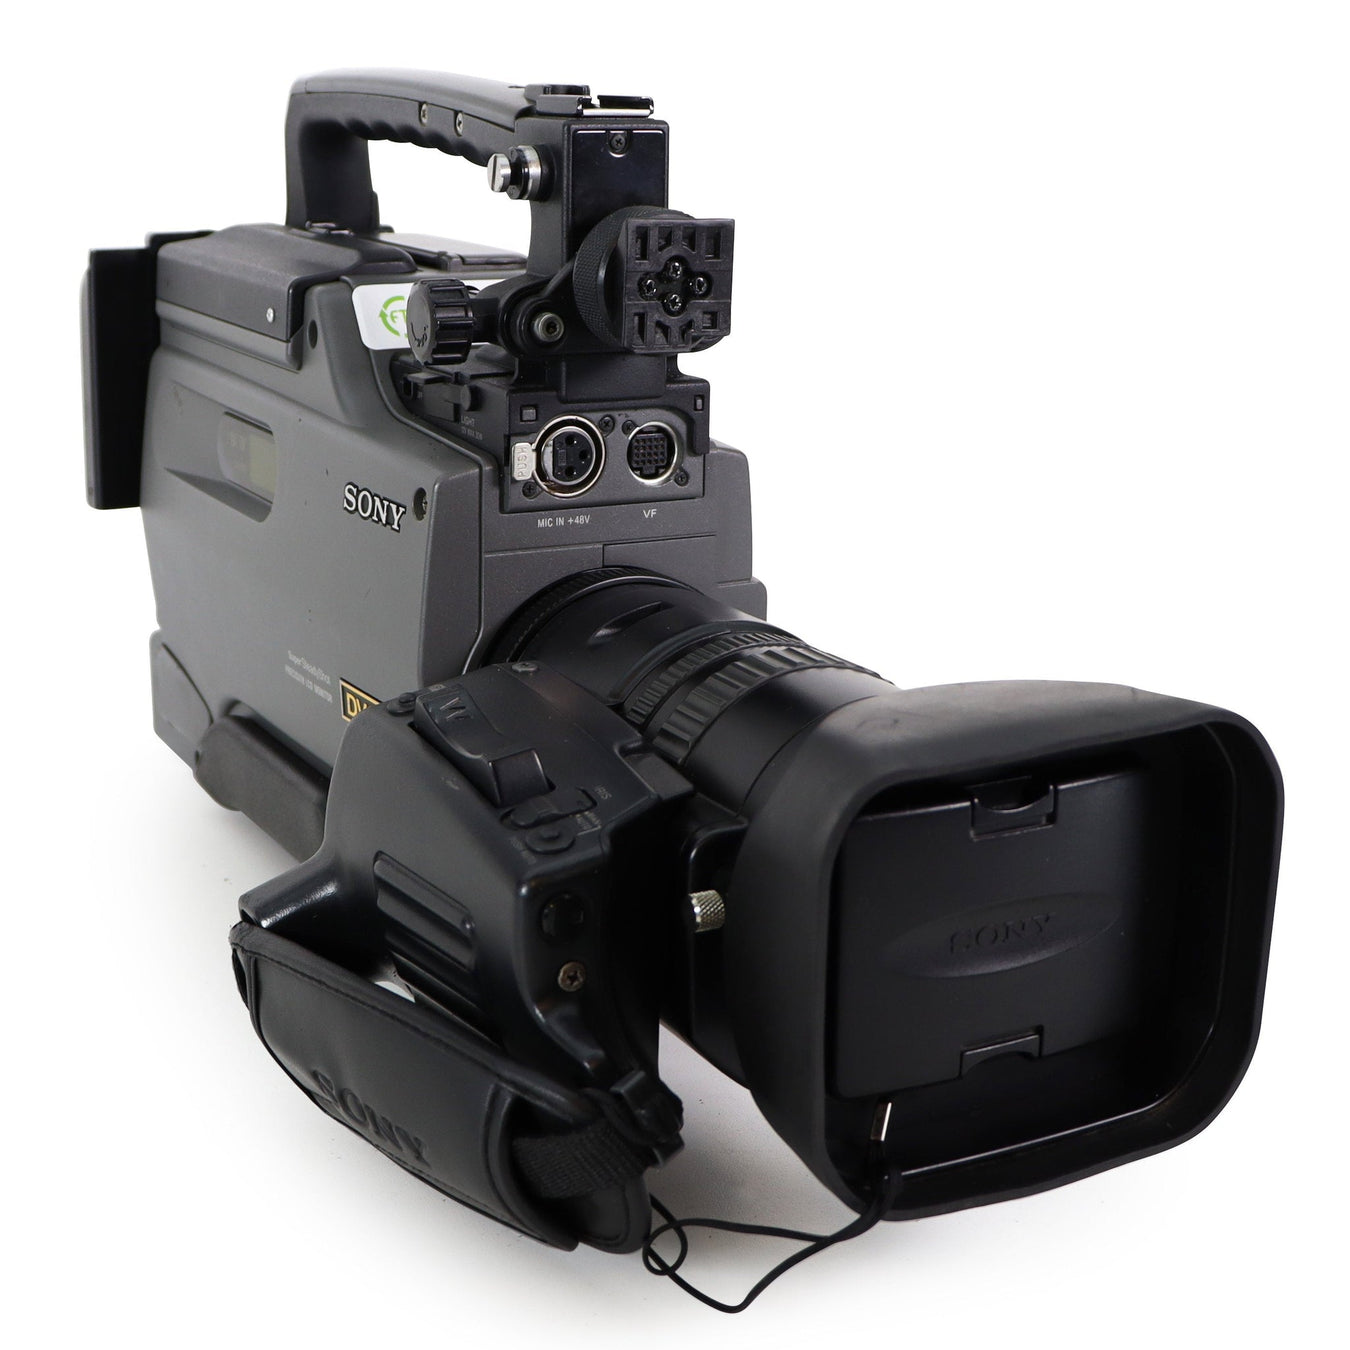 we sell vintage camera for a few different formats dv cam camcorder player hdv ccd cam lens carrying case professional news reporter